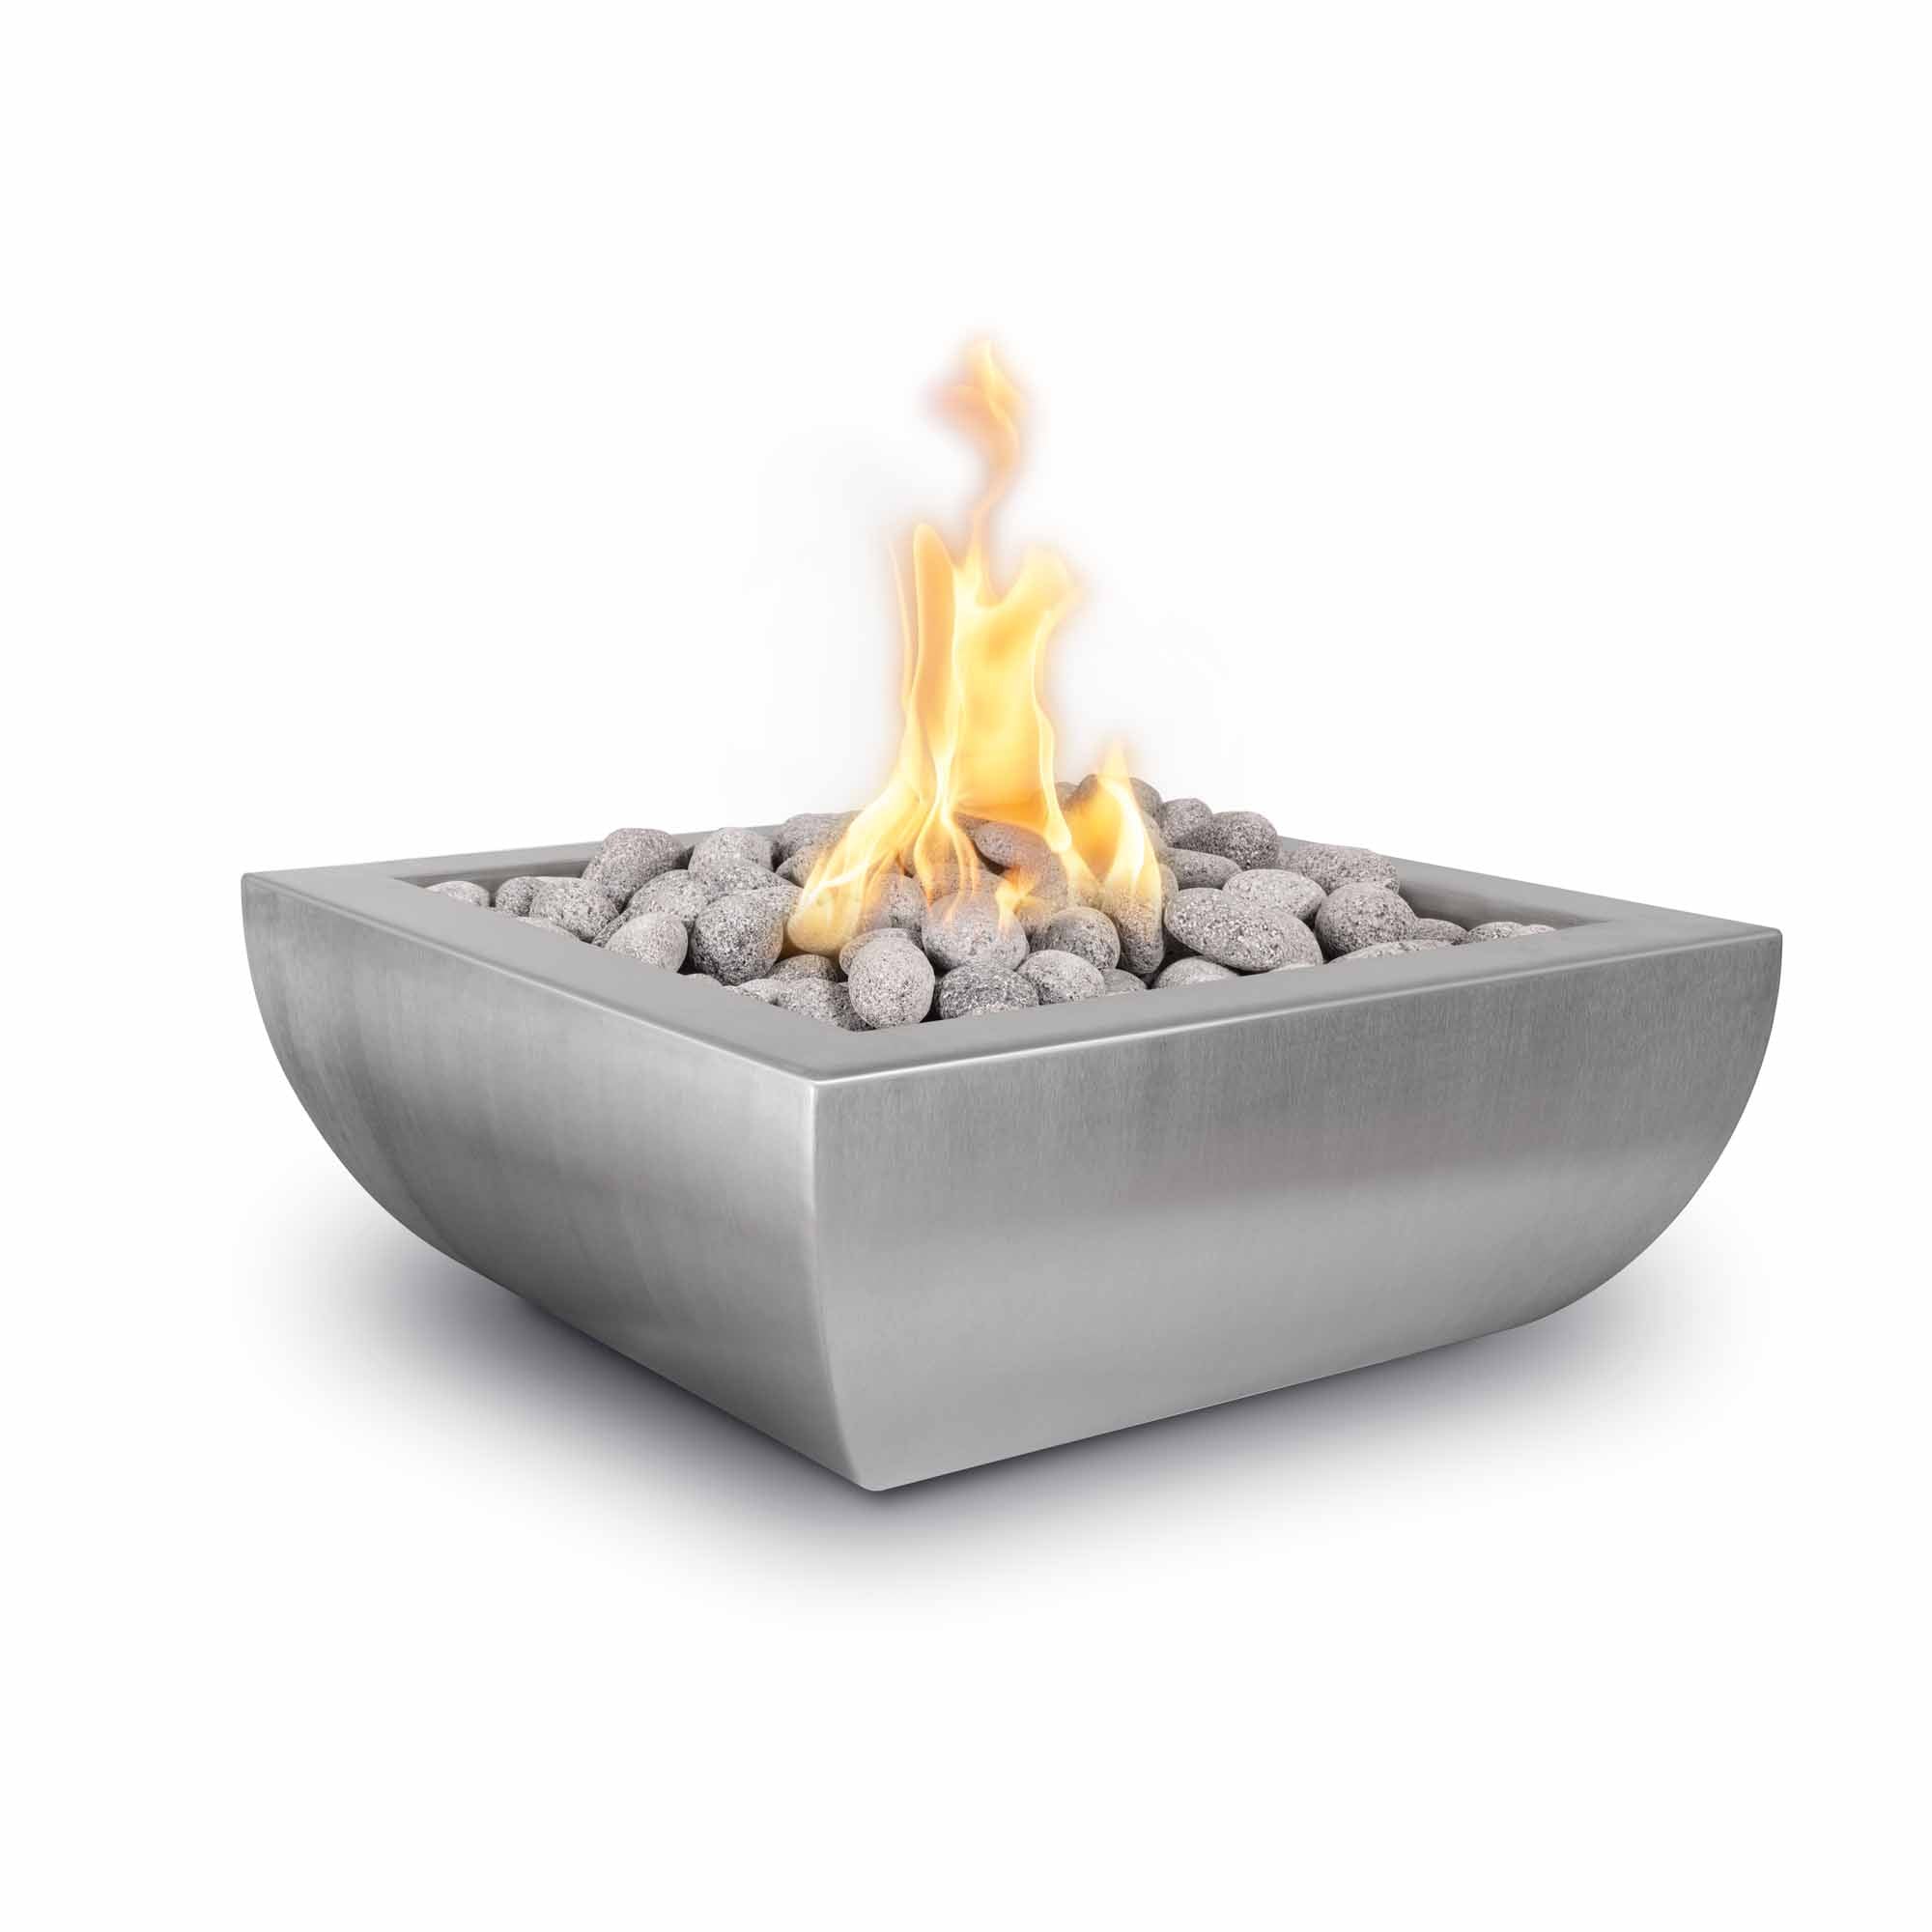 The Outdoor Plus Fire Bowl 24" / Match Lit The Outdoor Plus Avalon Fire Bowl | Stainless Steel OPT-24AVSSF